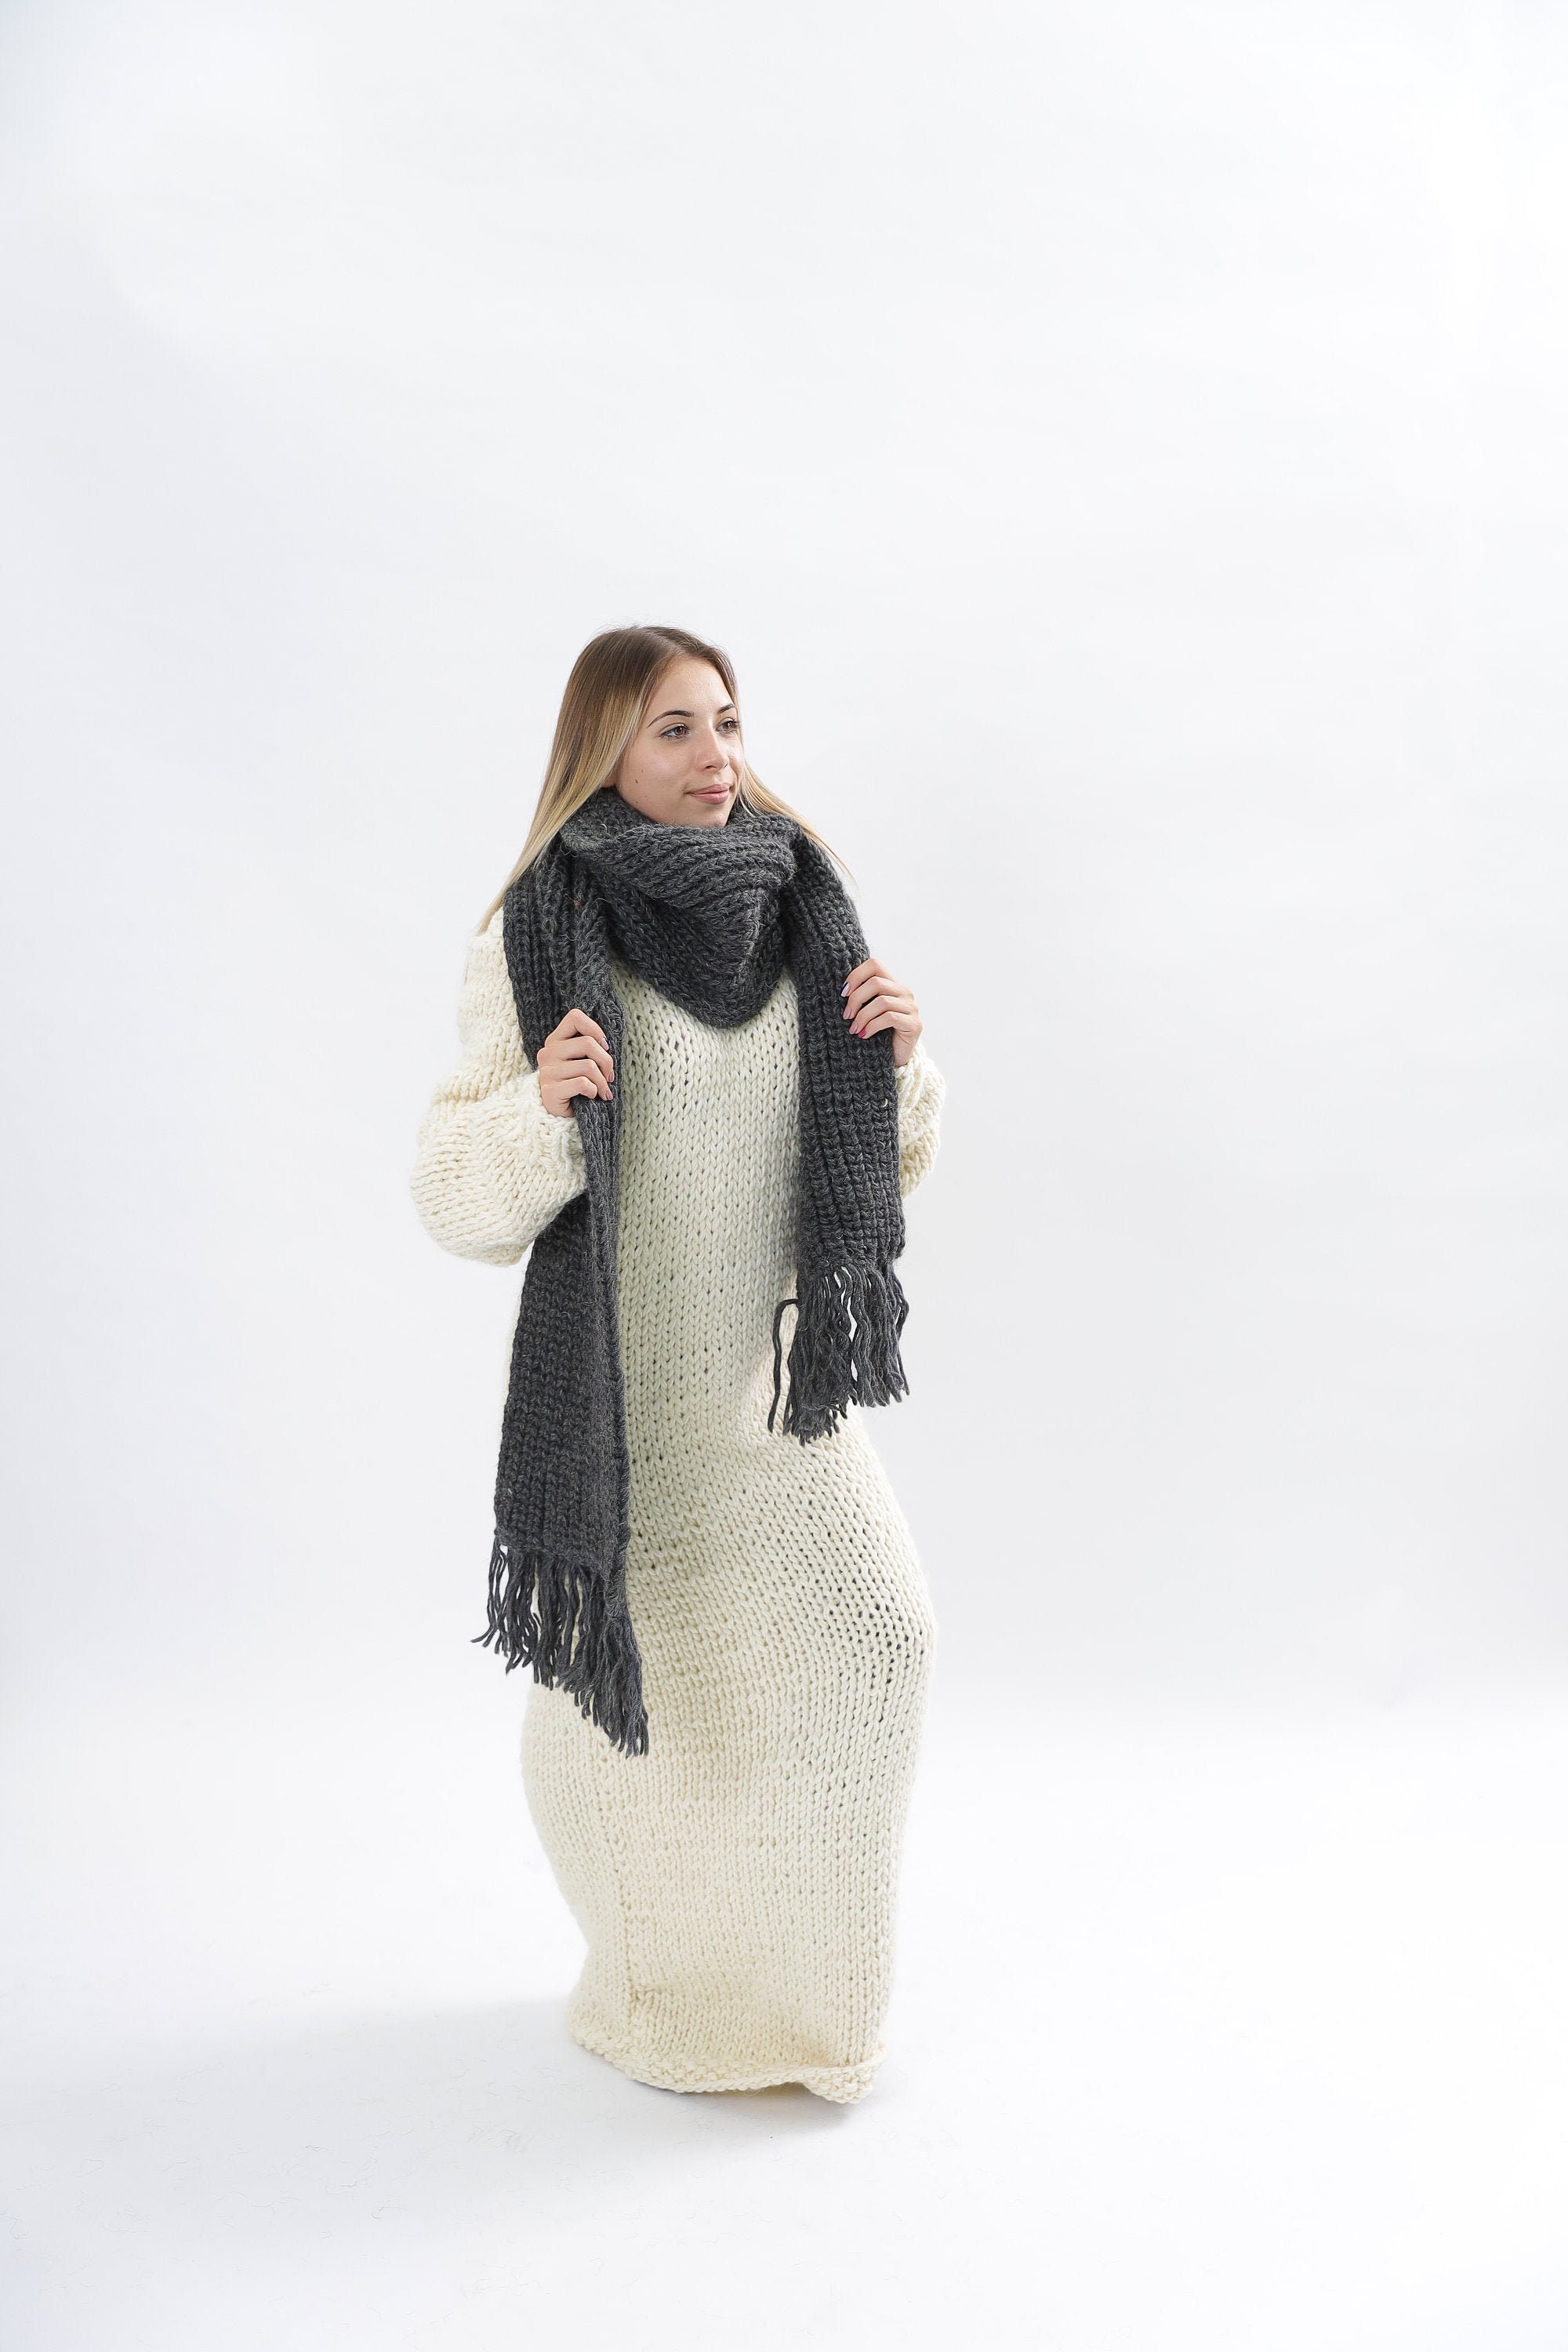 Extra Long Wool Knit Scarf , Knit Scarf, Chunky , Long Blue , Women Gifts Idea , Christmas Gifts